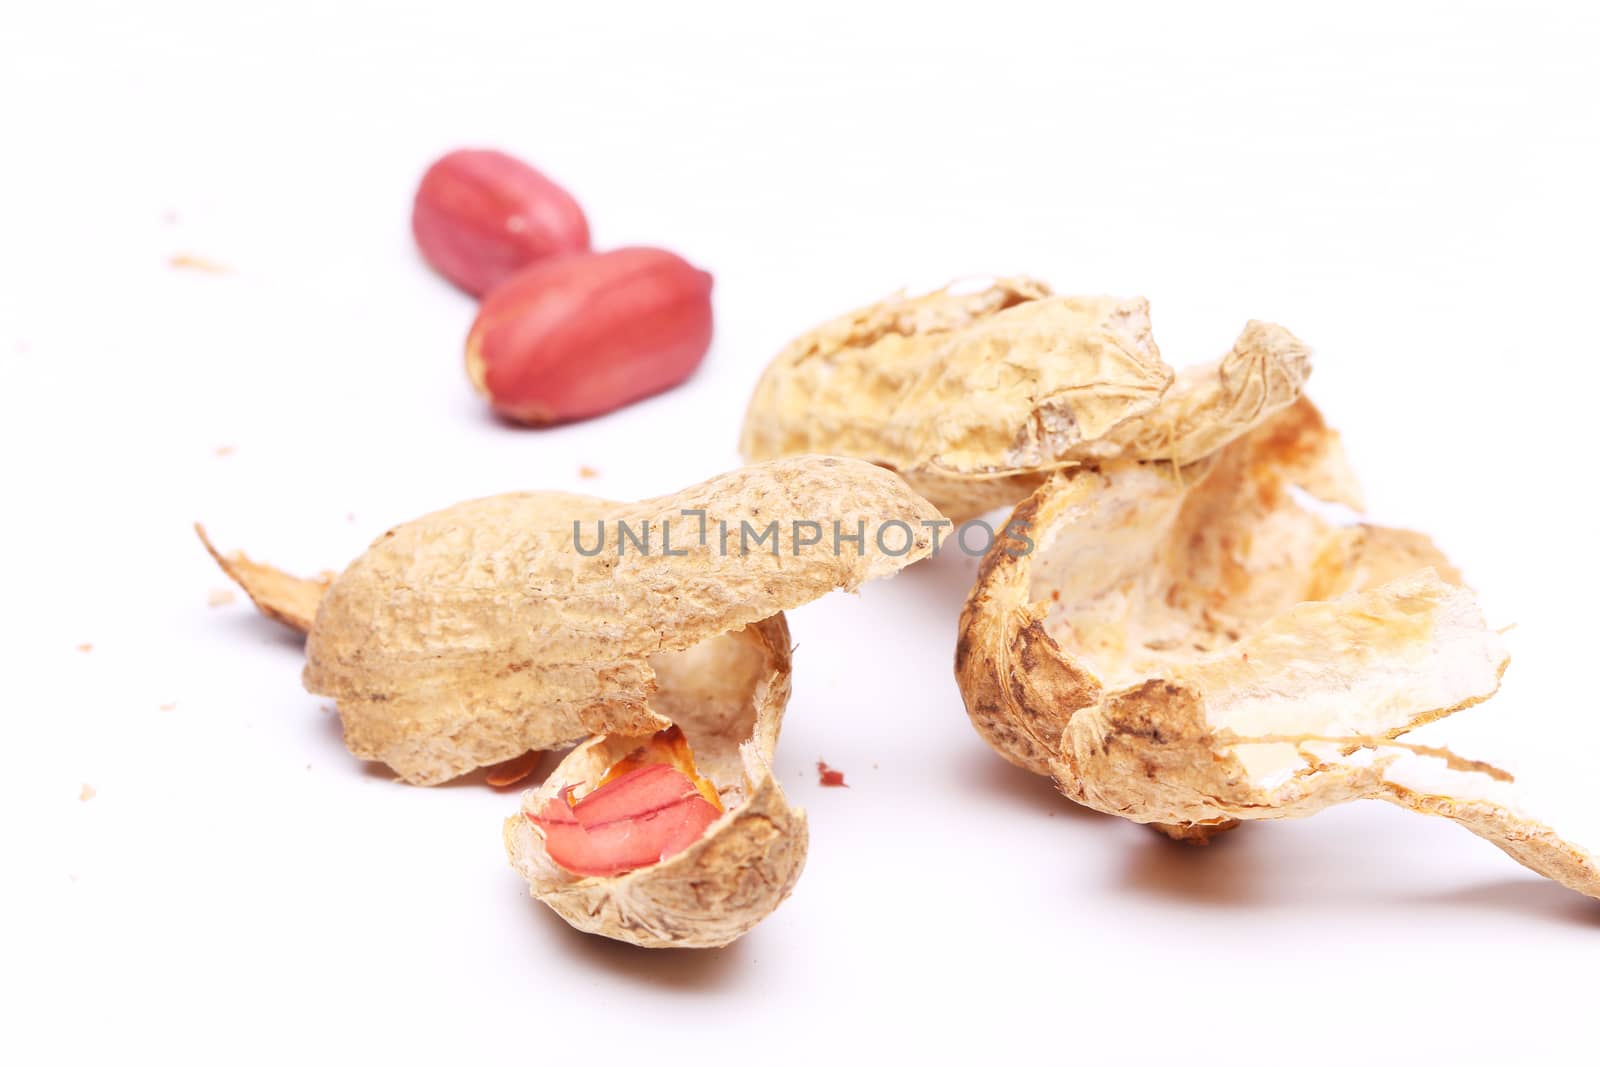 peanuts peel isolated on white background by indigolotos